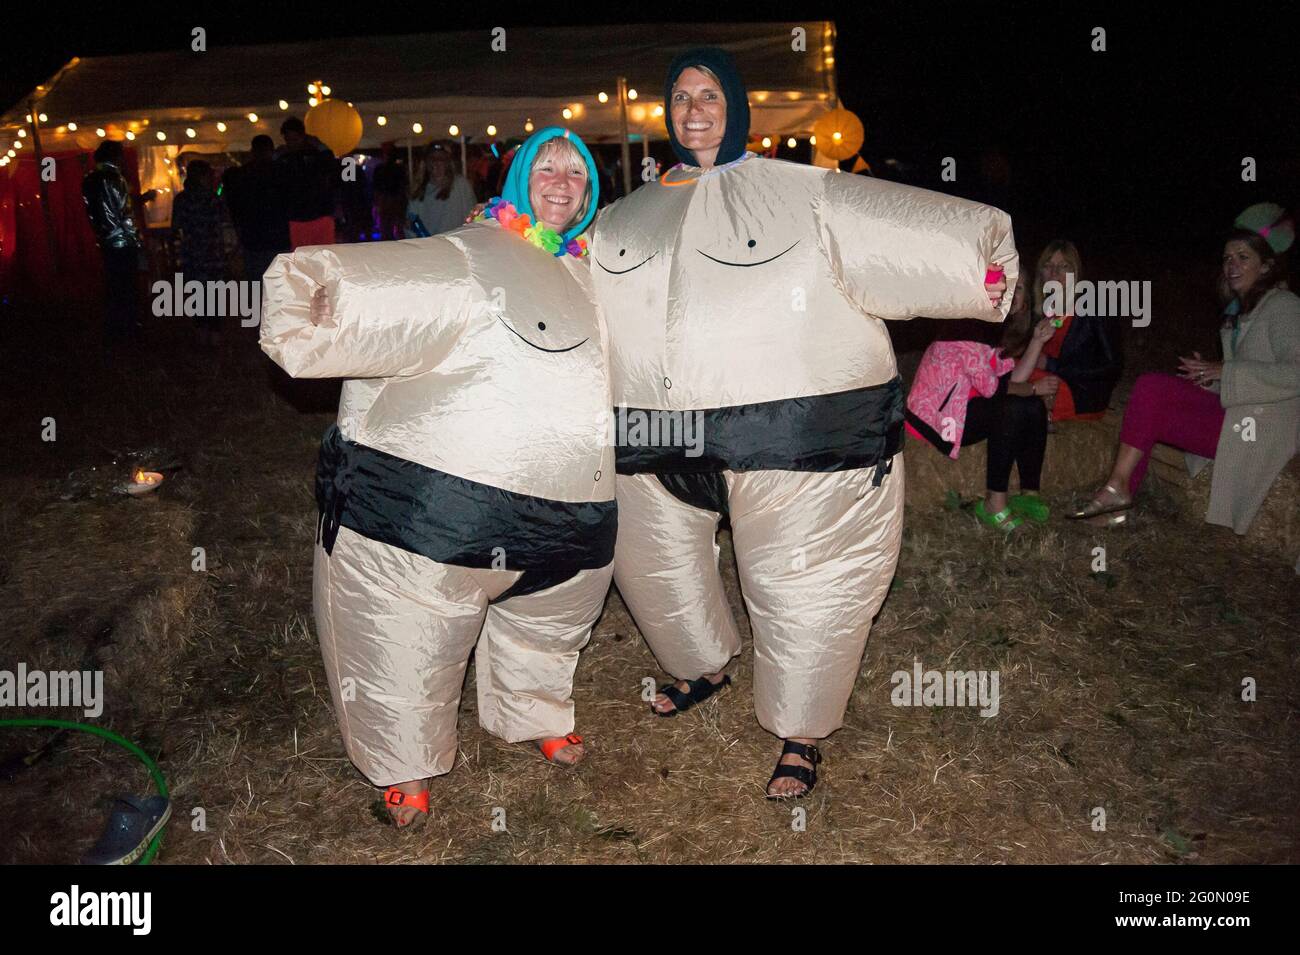 Two women dressed up in inflatable blow up sumo wrestler costumes Stock Photo